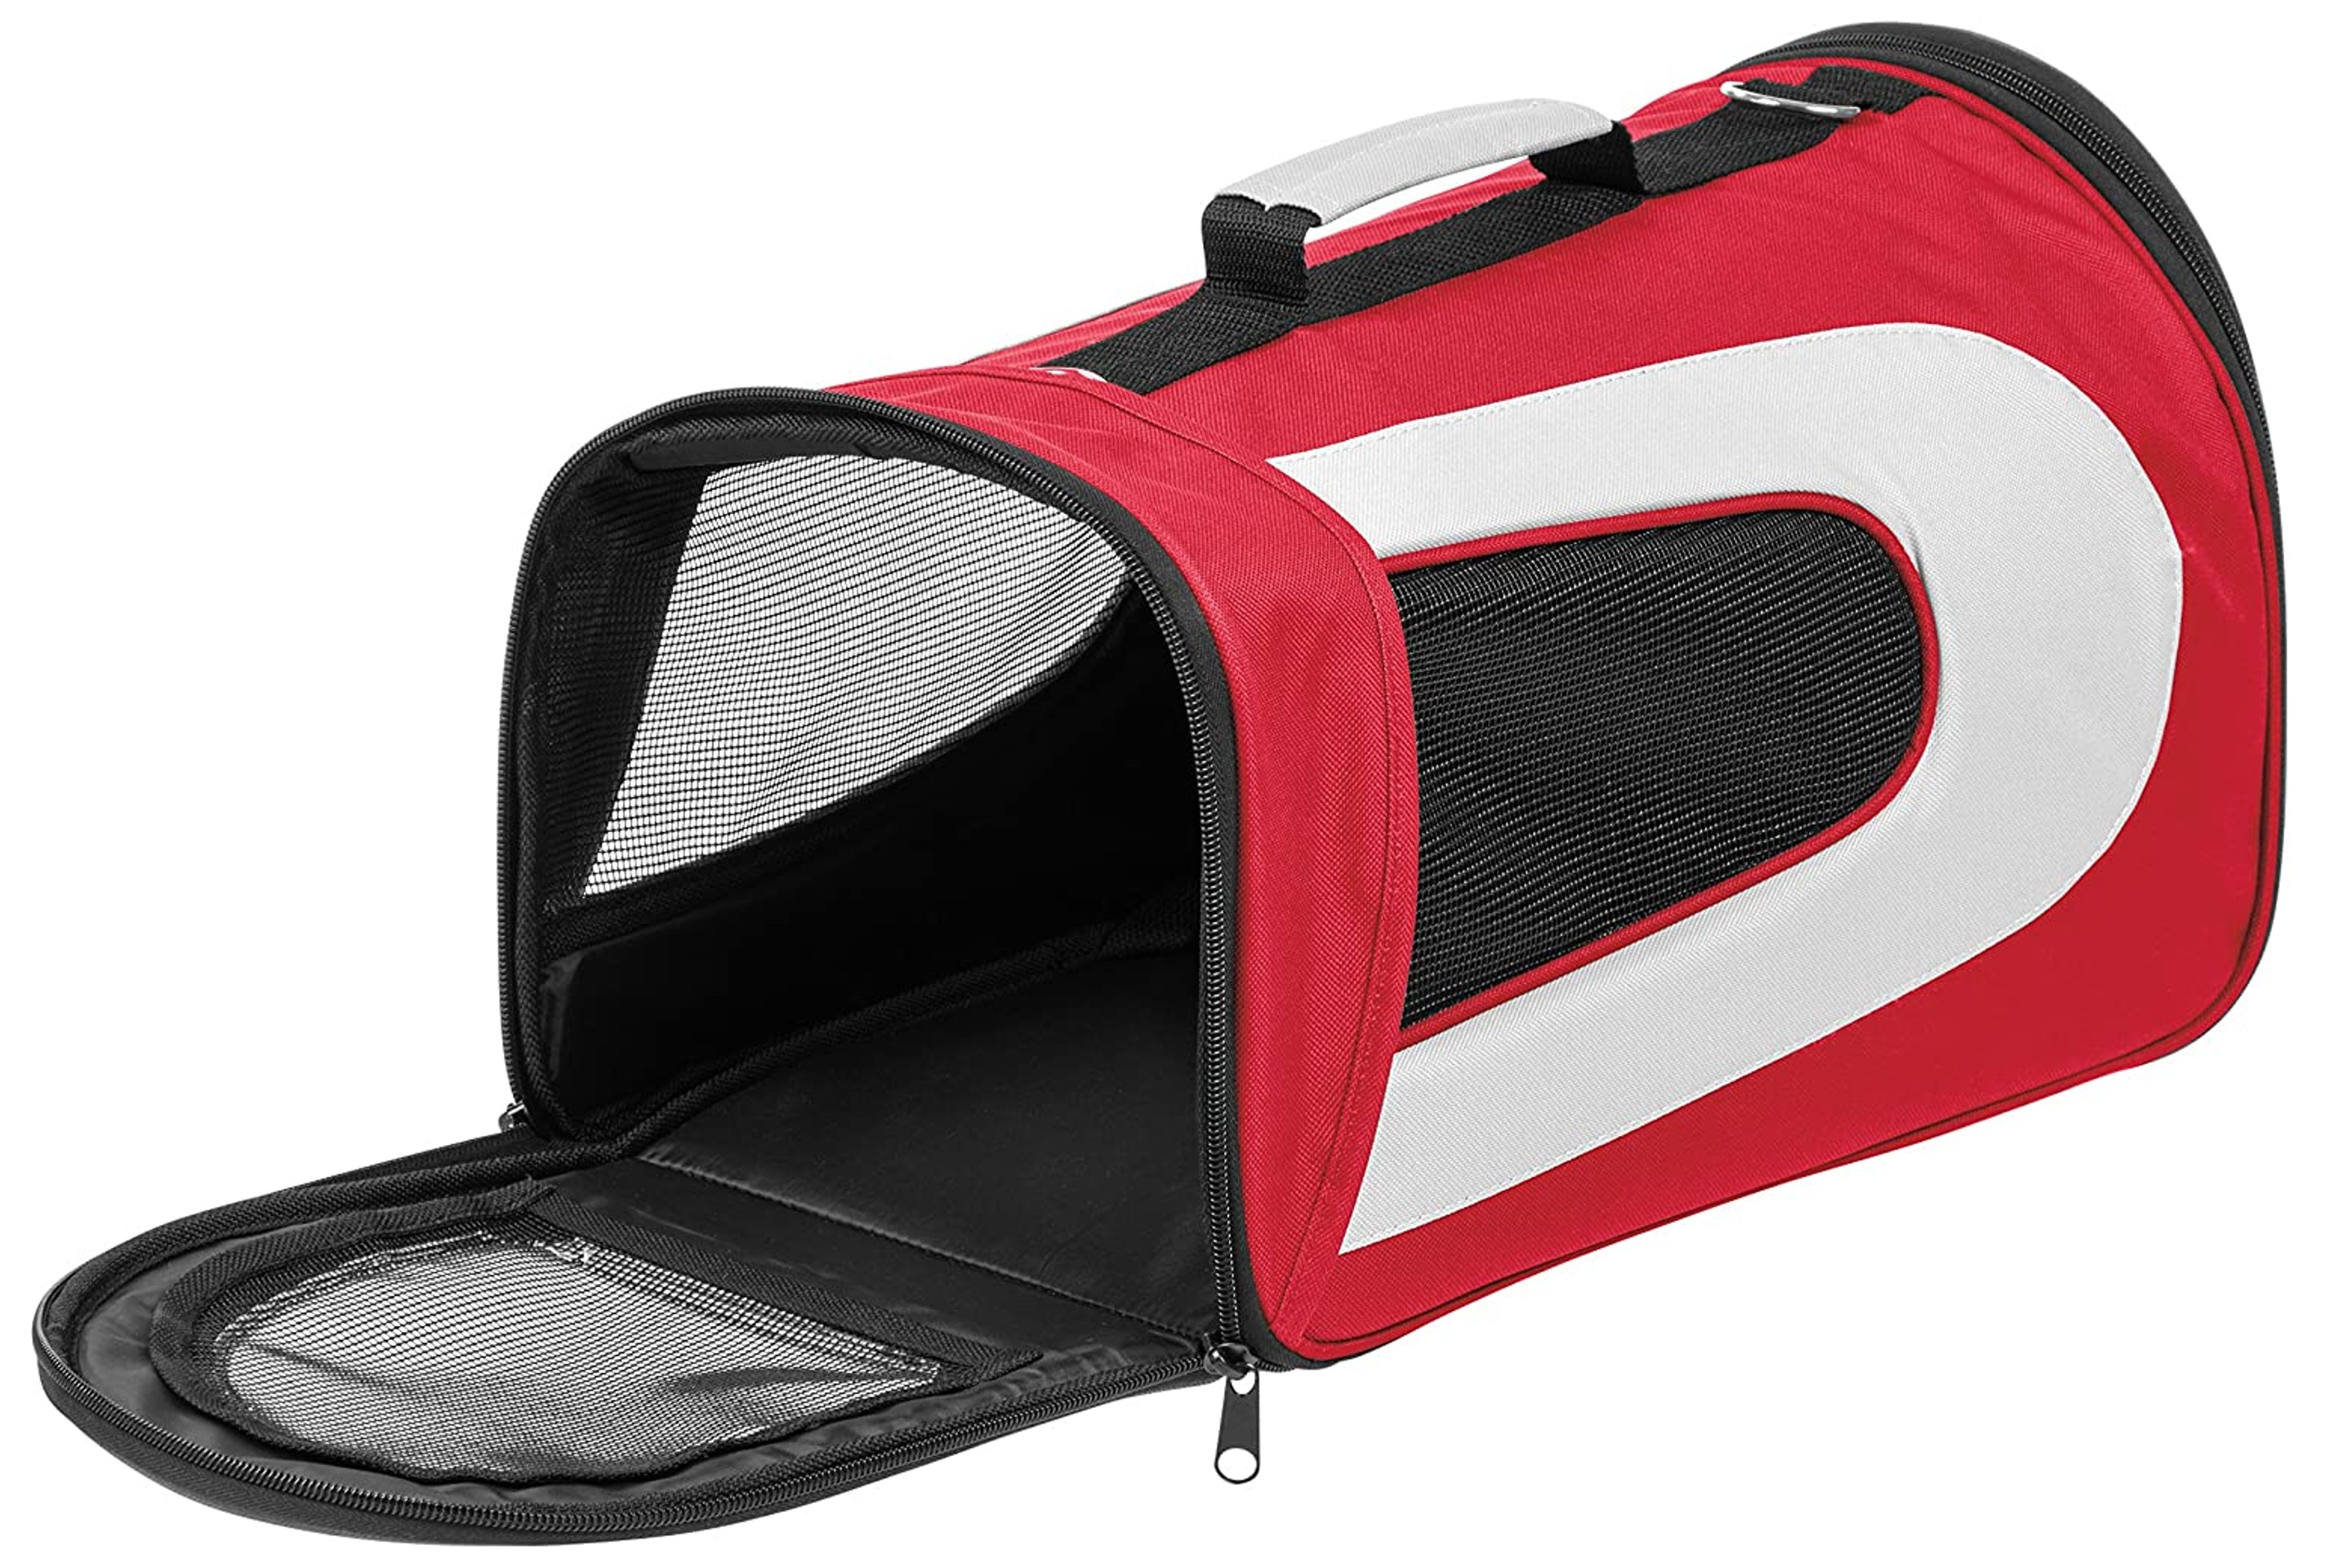 Large Soft-Sided Pet Carrier